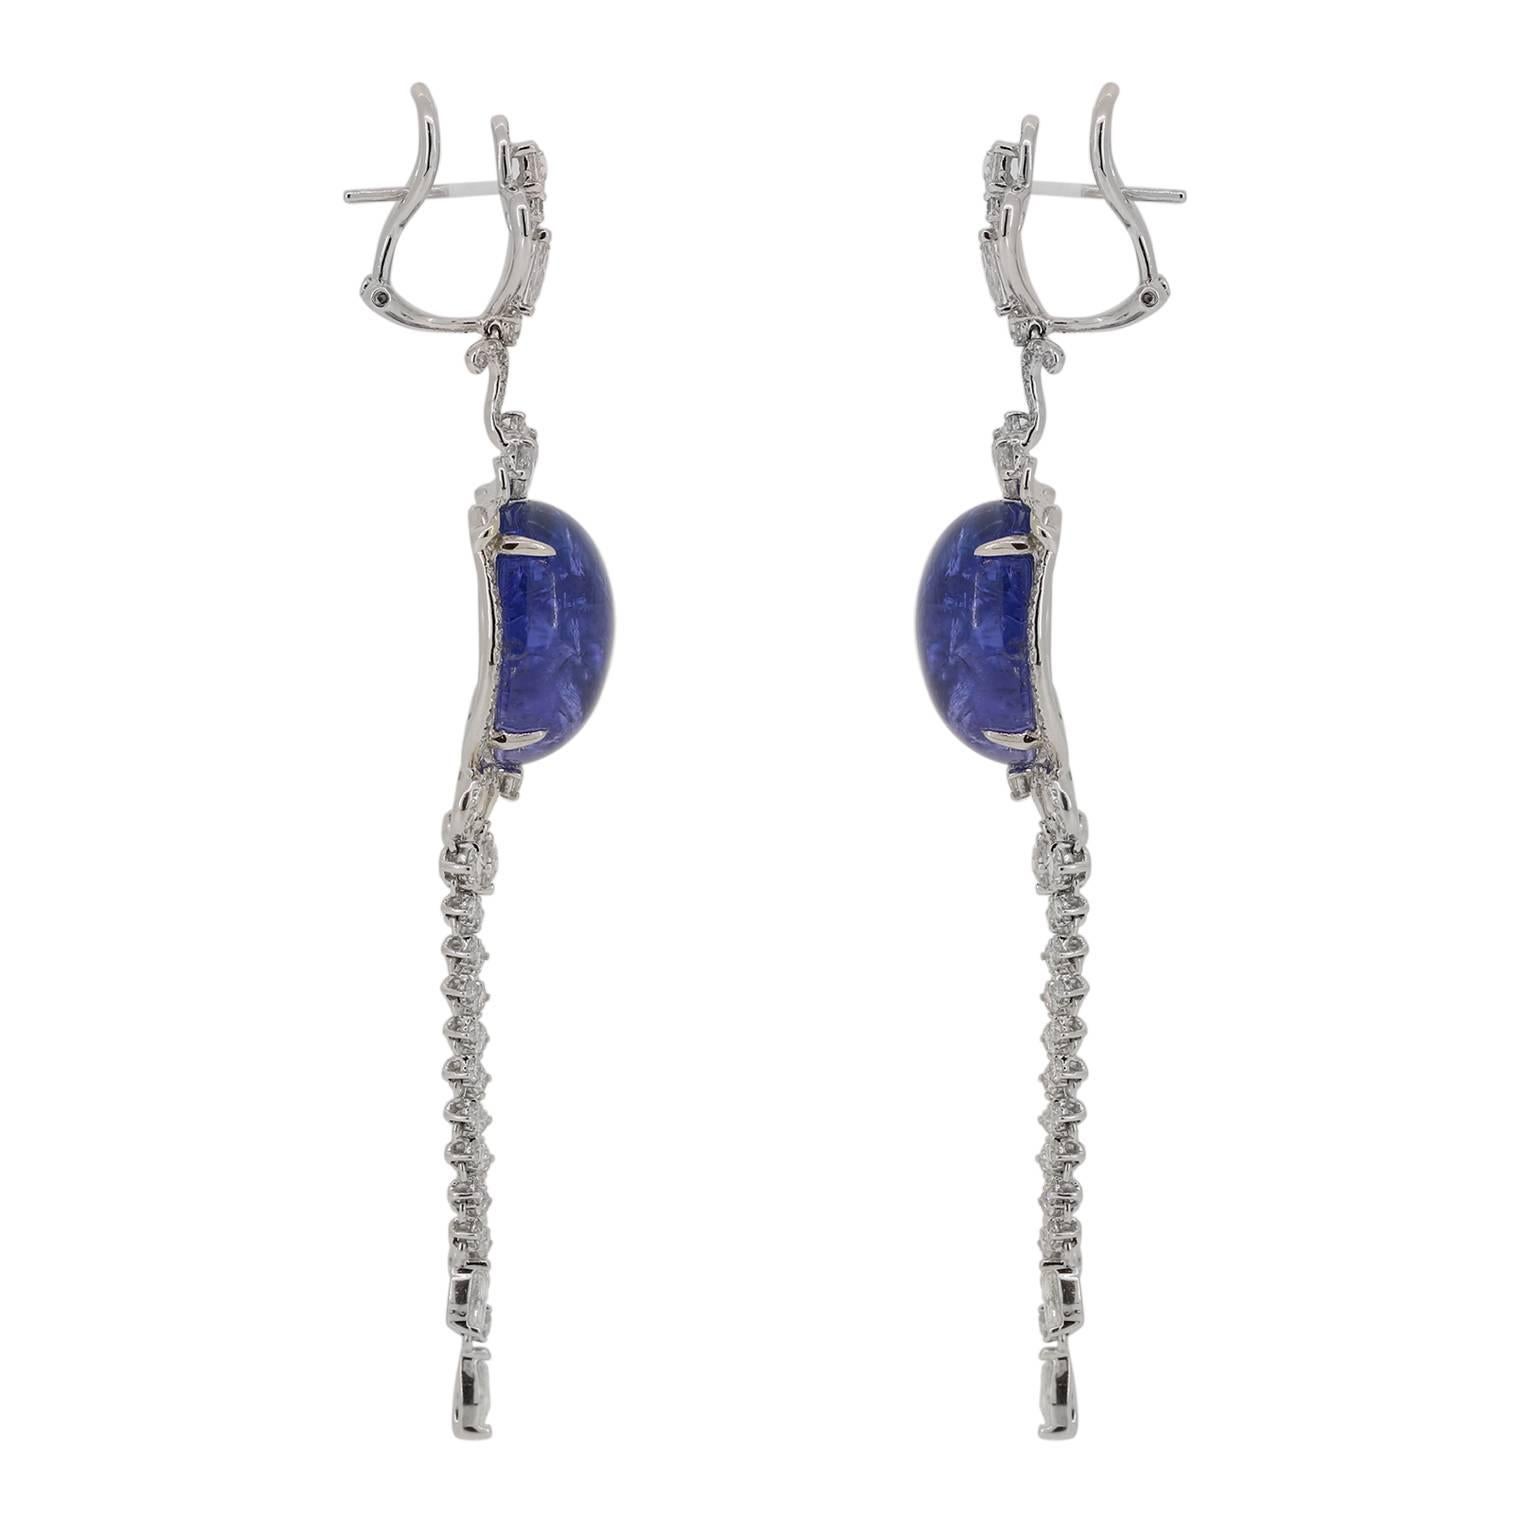 This velvety blue Tanzanite cabochon and diamond earring will look like you have just pulled it out of heirloom jewelry box. Bold yet elegant, this combination of gems is sure to enchant even the most fickle fashionista. 18k White Gold Omega Clip /